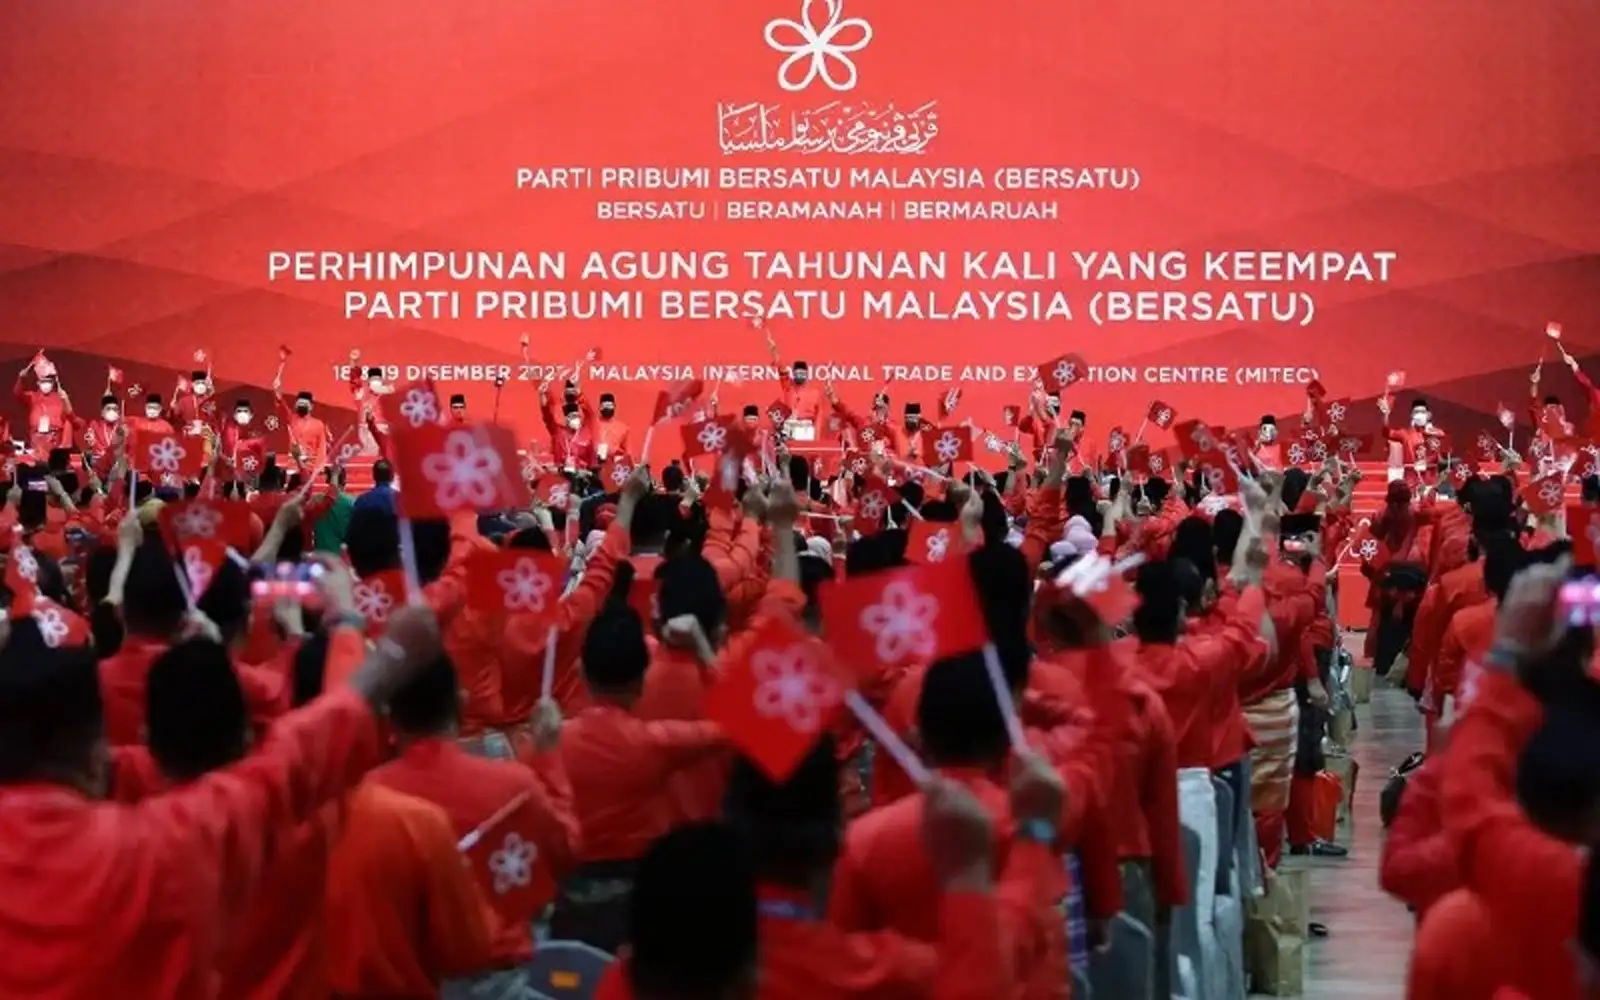 Bersatu grassroots want change to ‘top 5’ candidate rule after KKB setback, says source